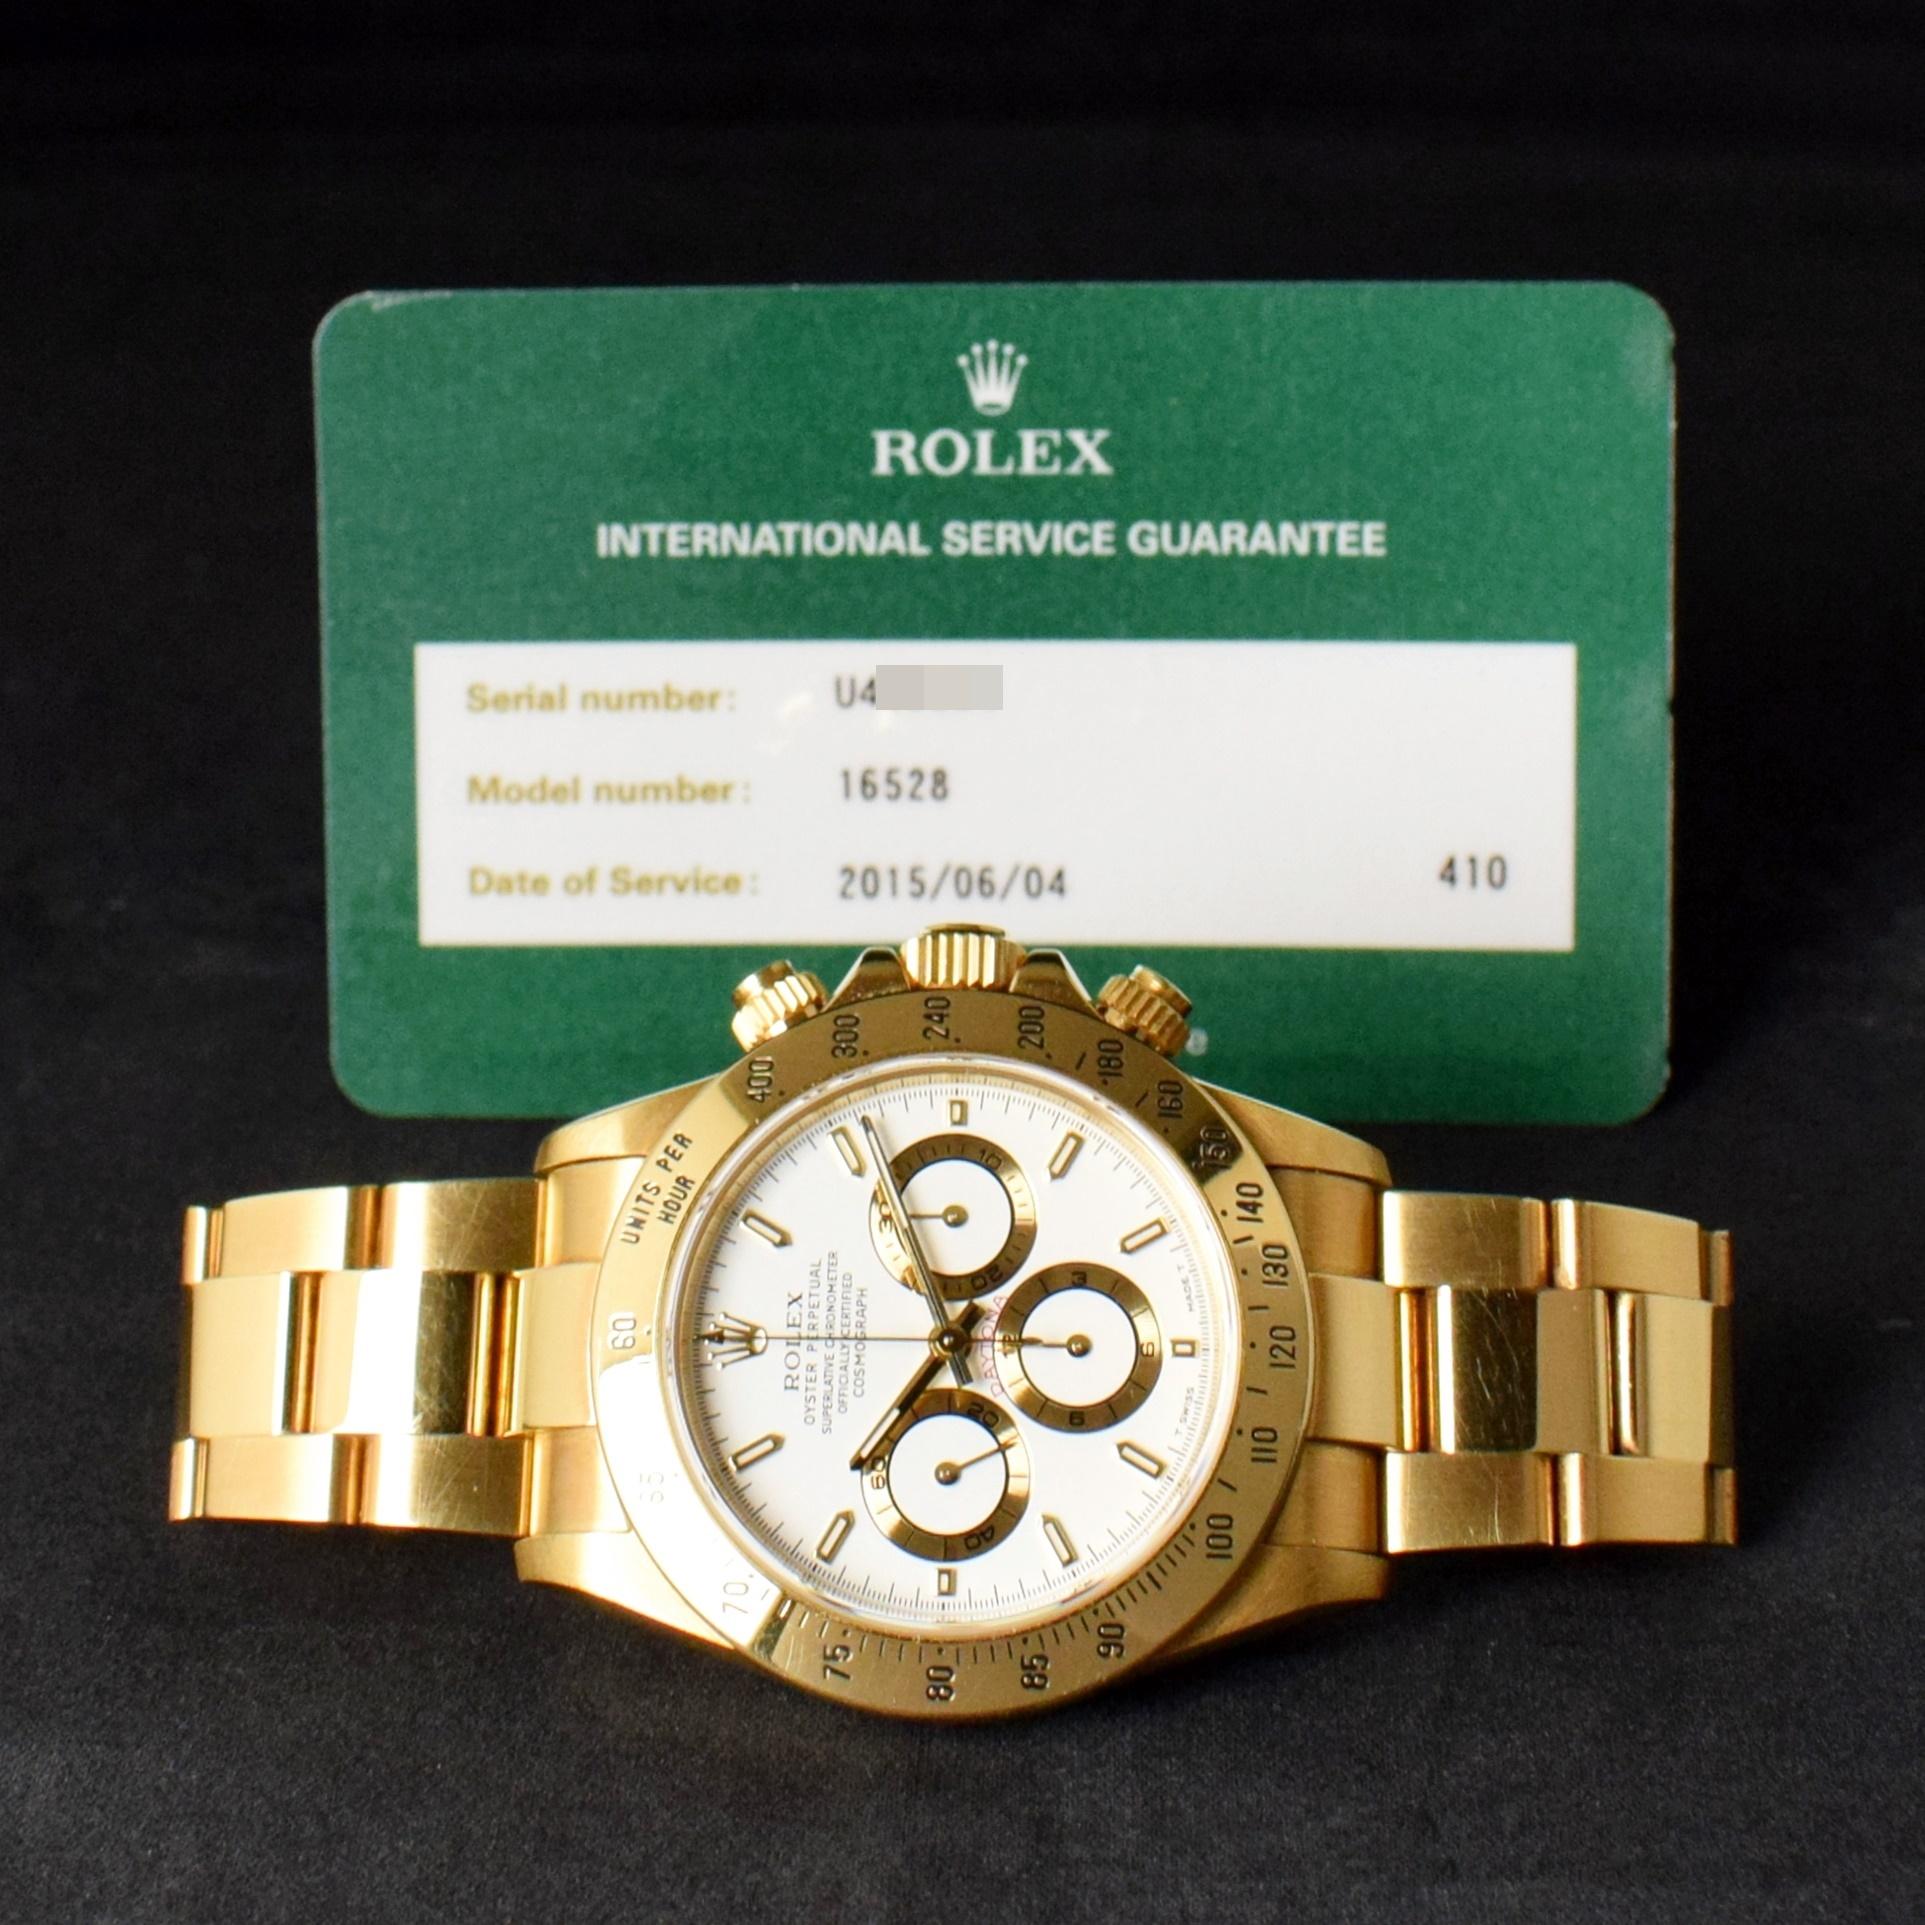 Brand: Rolex
Model: 16528
Year: 1997
Serial number: U4xxxxx
Reference: C03709
Case: 18K Yellow Gold case shows sign of wear with slight polish from previous; inner case back stamped 16500
Dial: Excellent Condition Tritium White Dial w/ matching